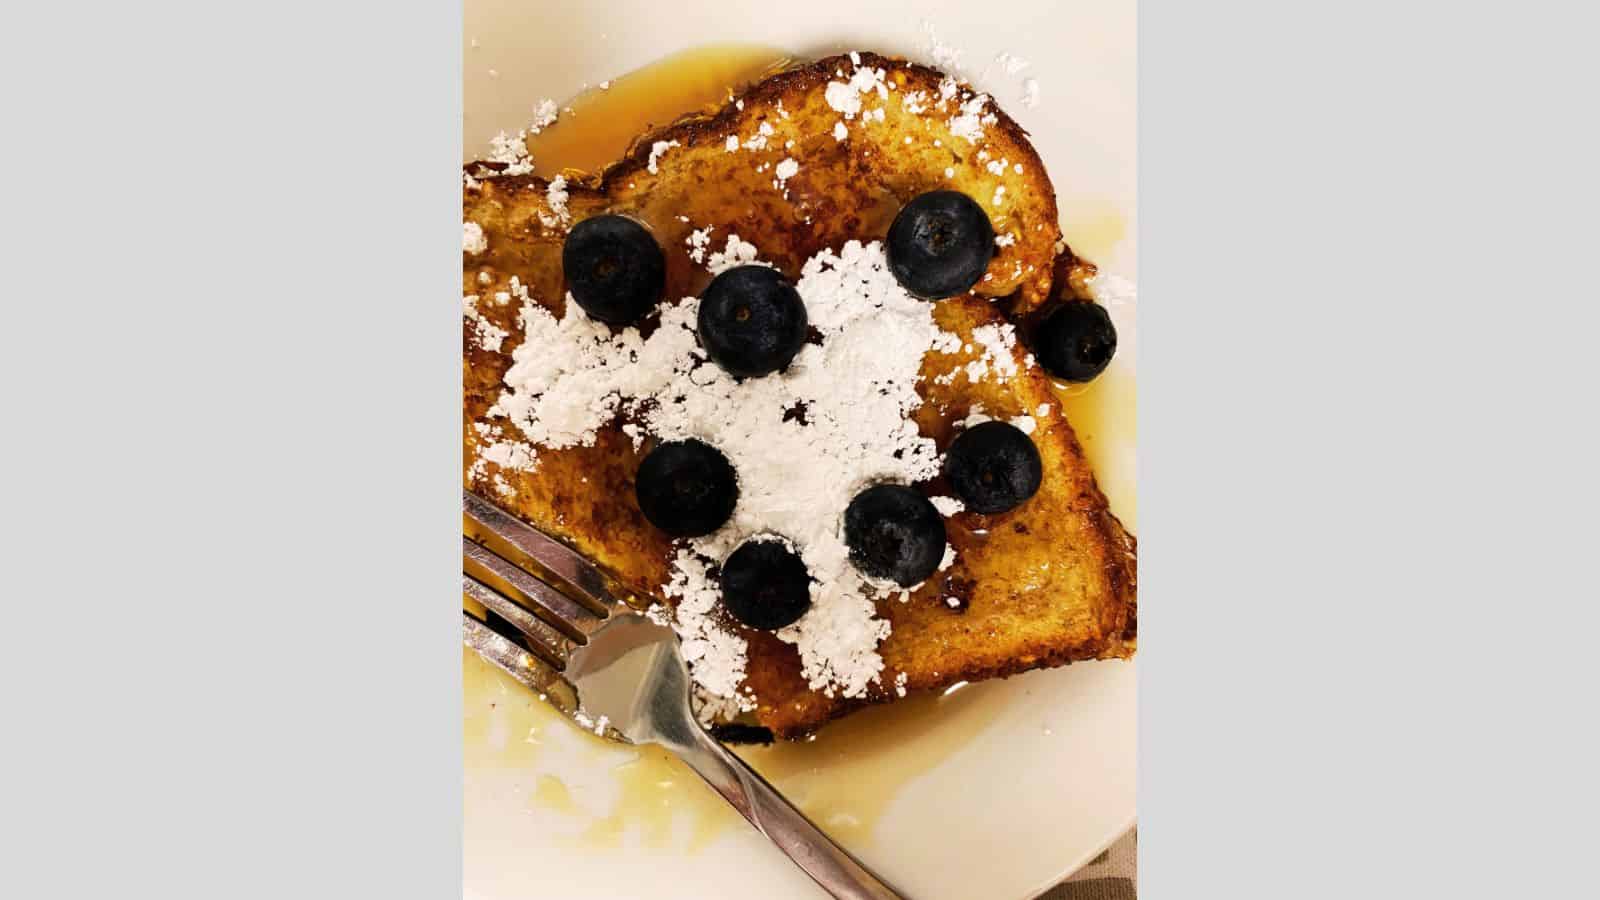 Slice of French toast on white plate topped with blueberries, powdered sugar, and syrup.